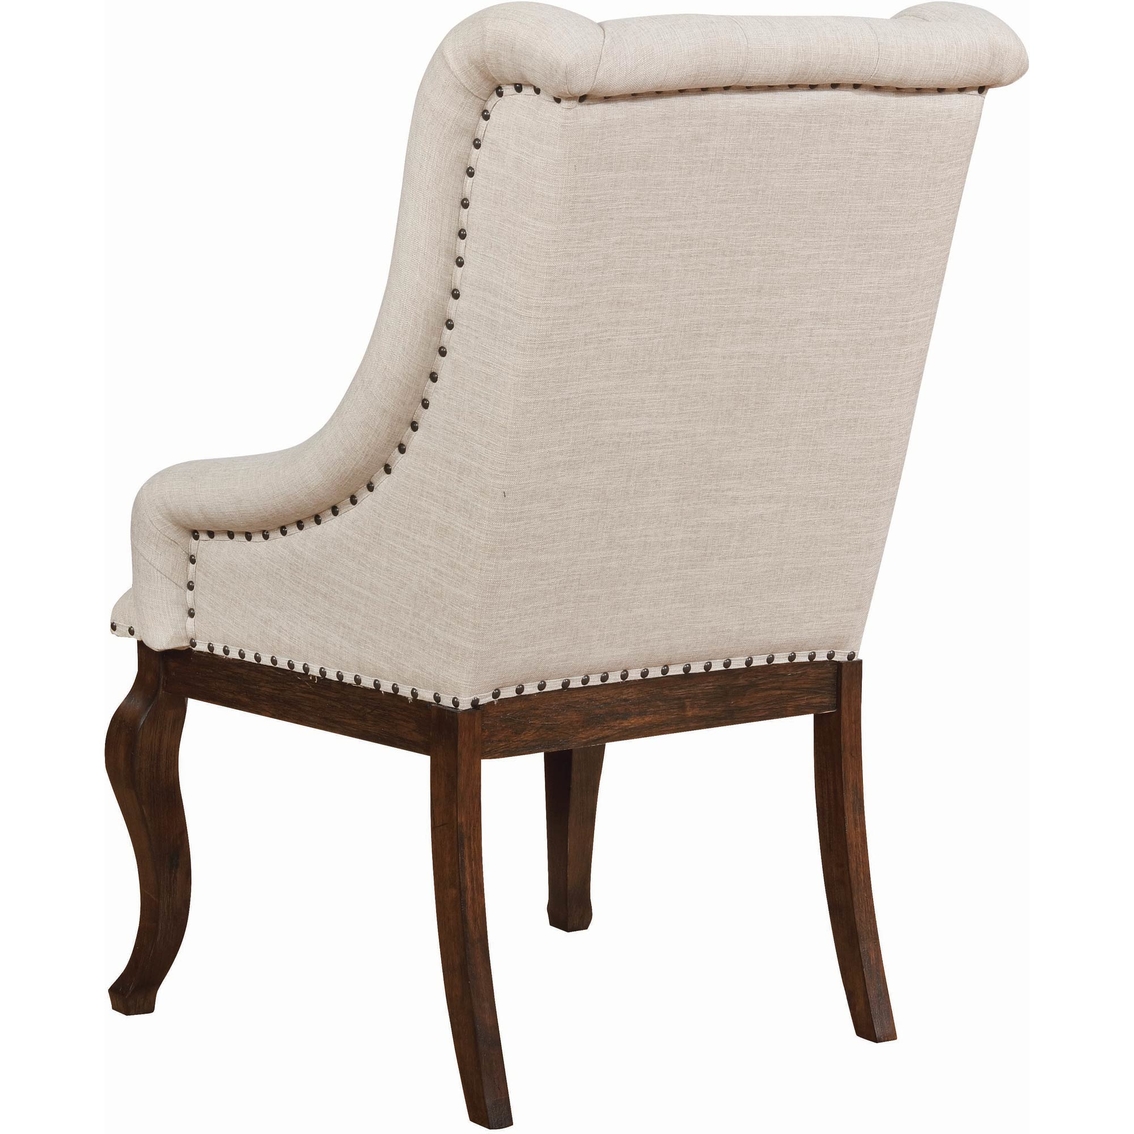 Coaster Glen Cove Arm Chair with Trim 2 pk. - Image 2 of 3